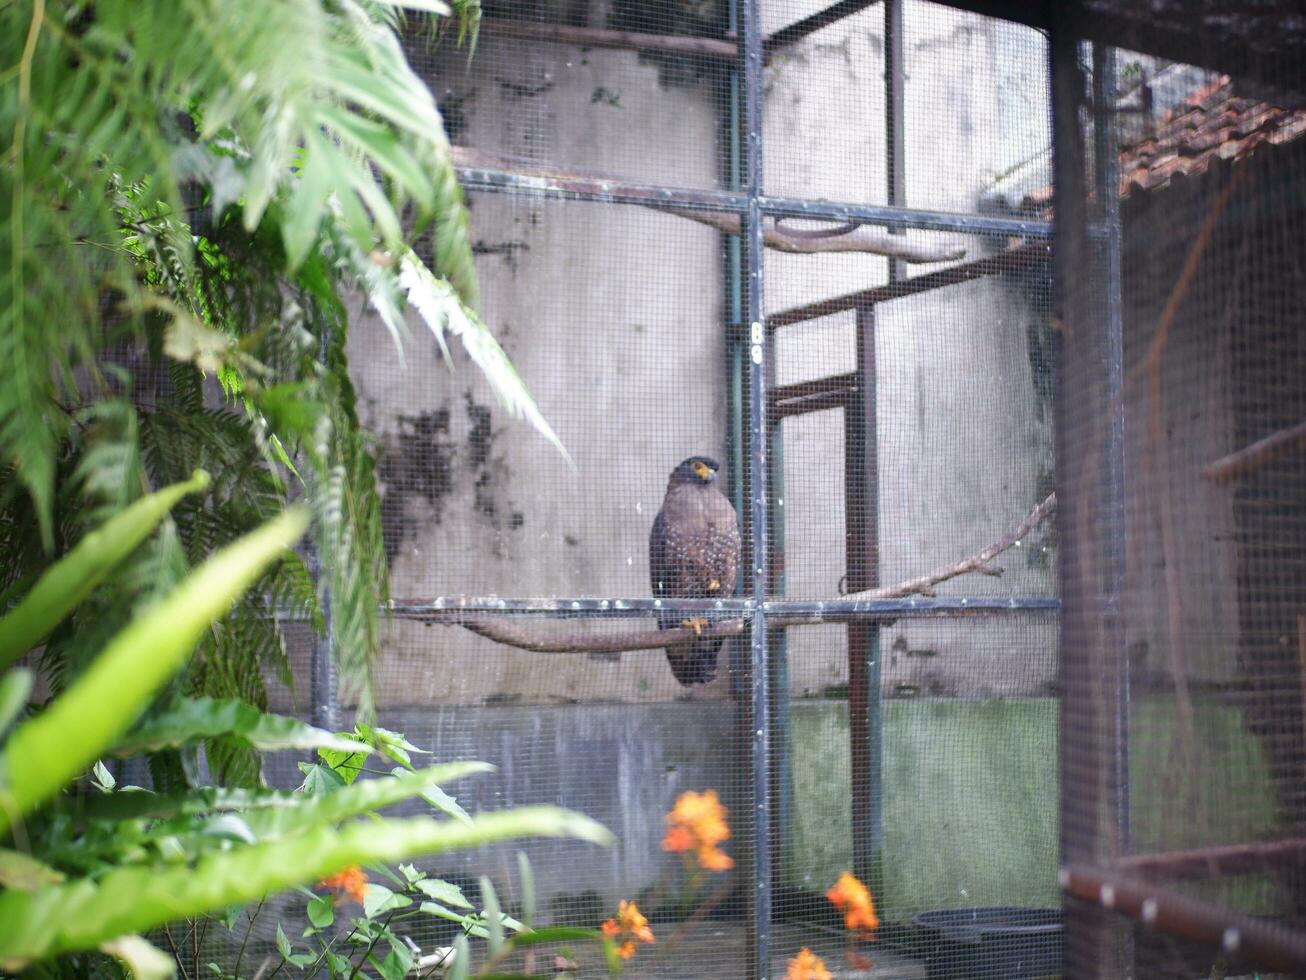 An Eagle playing with a rock on the ground then opens its wings in the cage photo